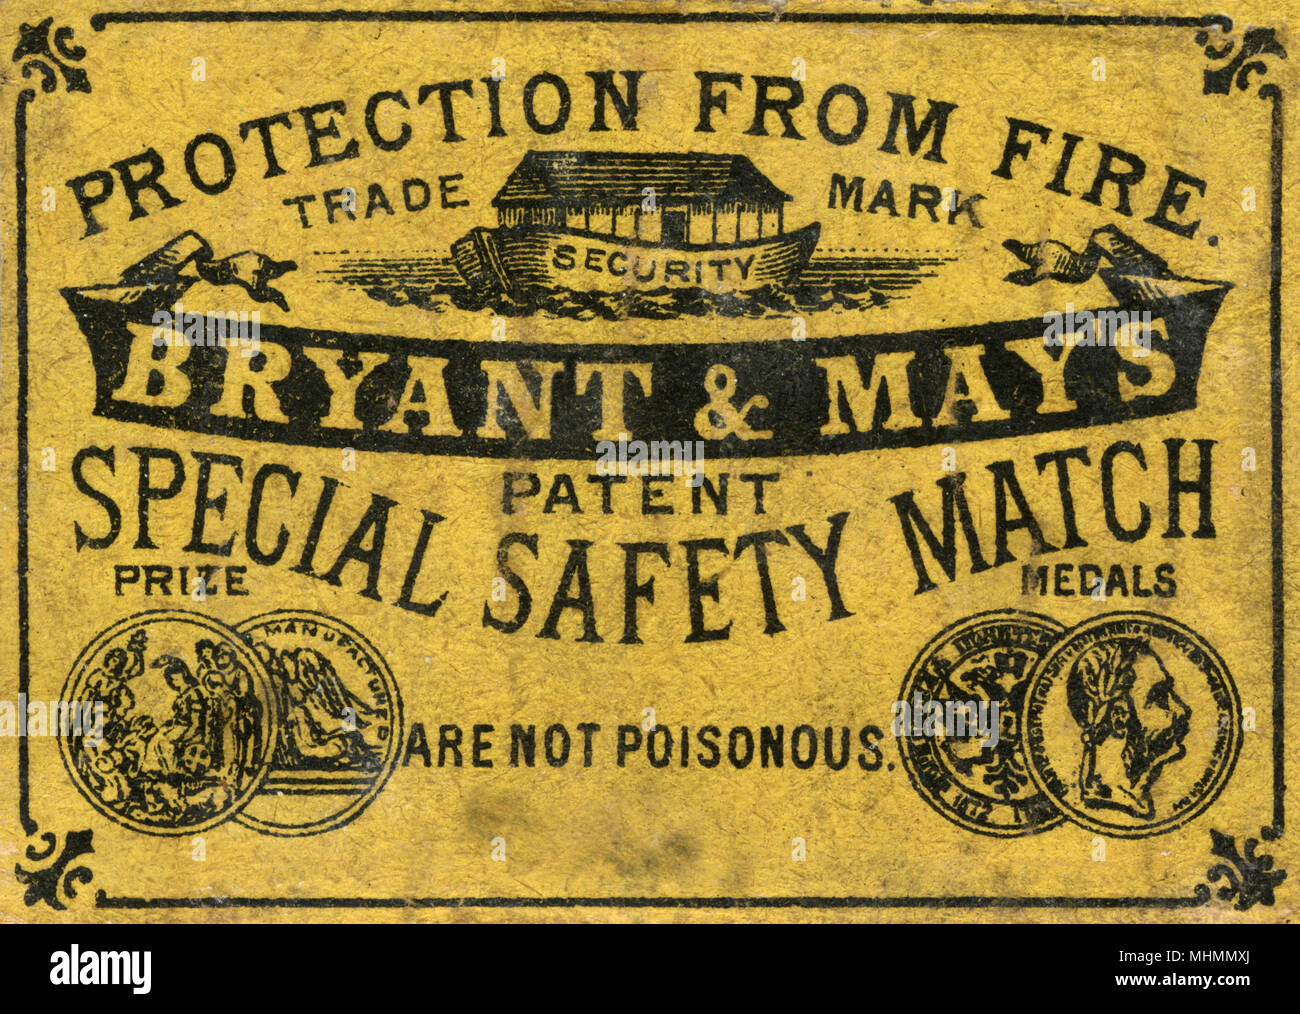 Bryant and May special safety match matchbox label with prize medals and stating protection from fire and are not poisonous     Date: c. 1910s Stock Photo